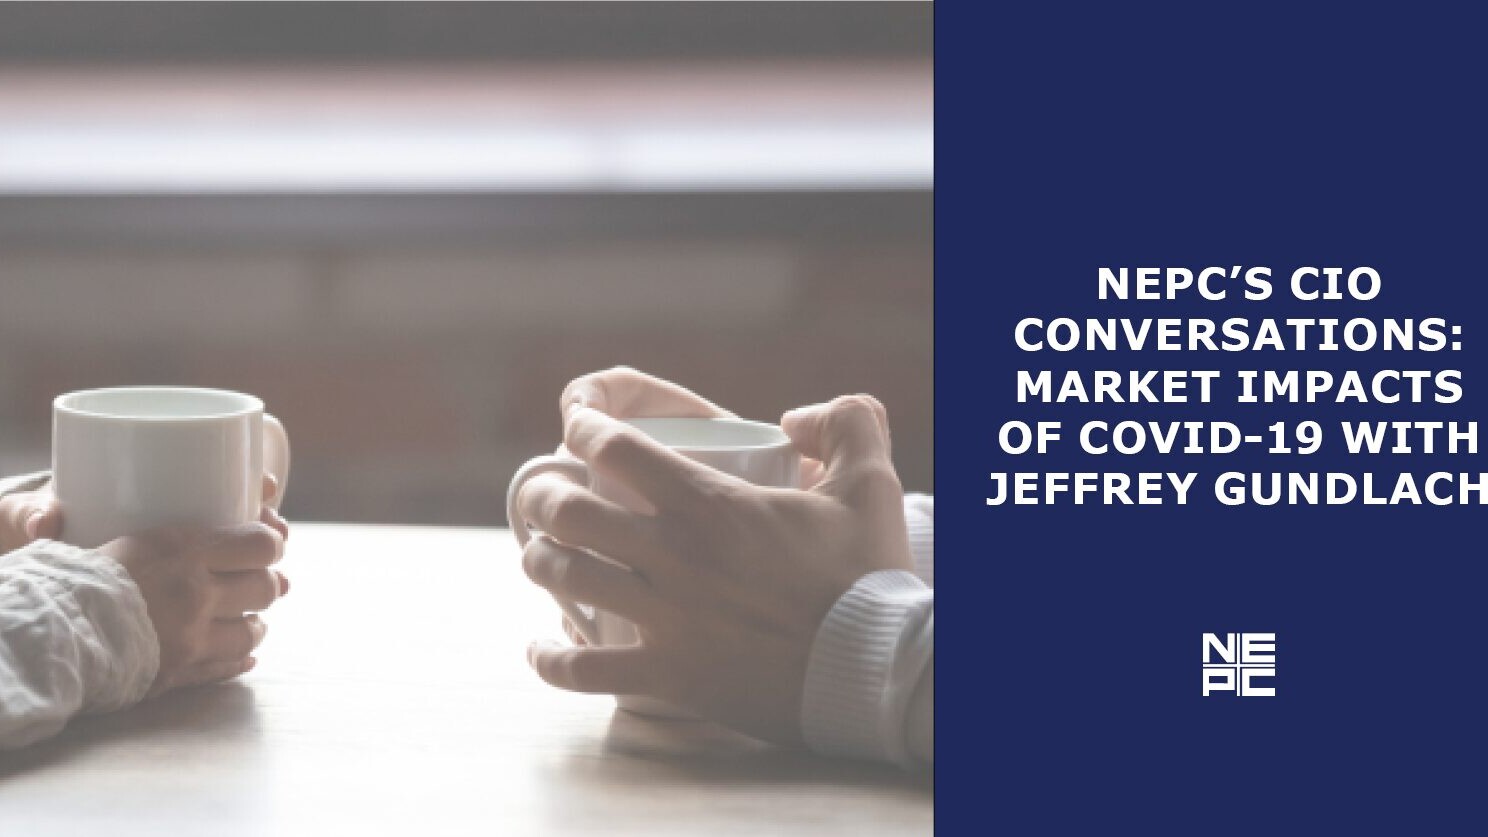 Two facing people holding porcelain coffee cups. Copy reads: NEPC's CIO Conversations: Market Impacts of COVID-19 with Jeffrey Gundlach.